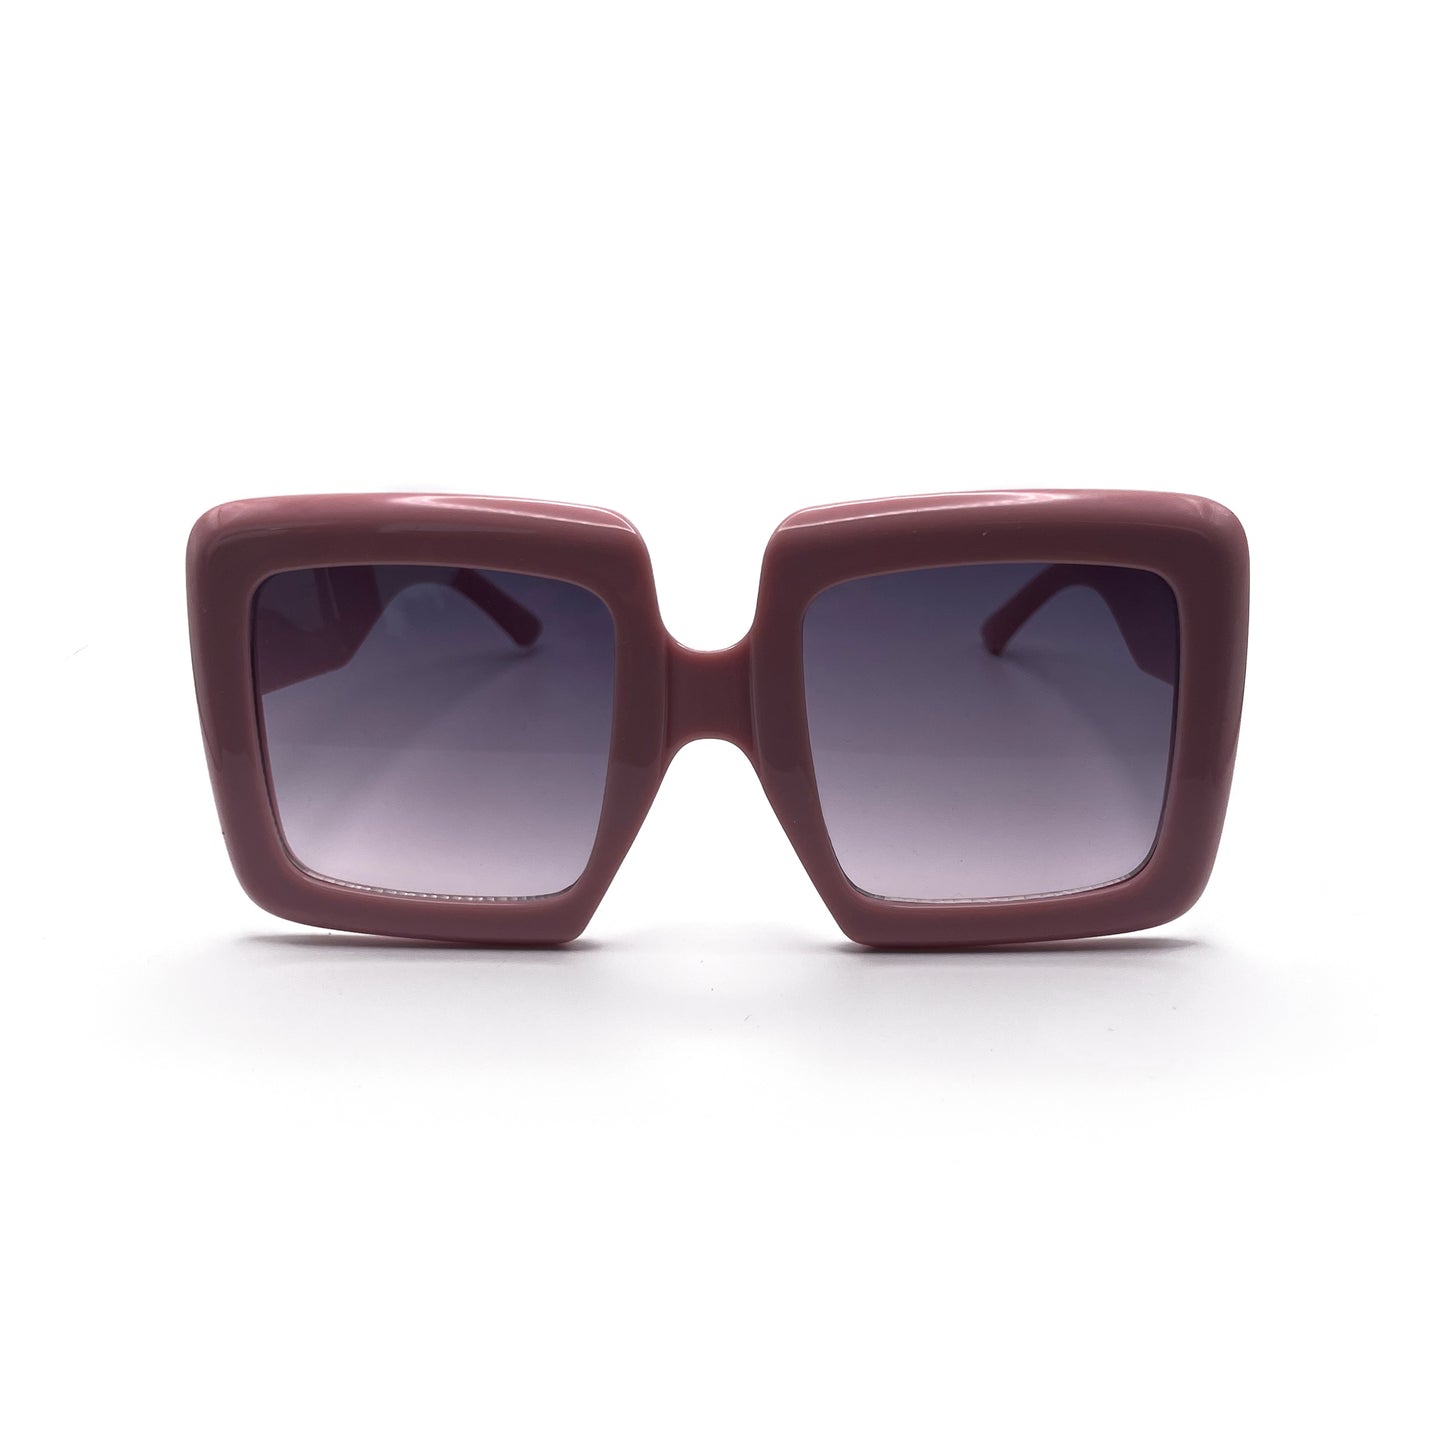 Grounded Barb Pink SUNNIES + OPTICS Sunglasses Collection- NRODA